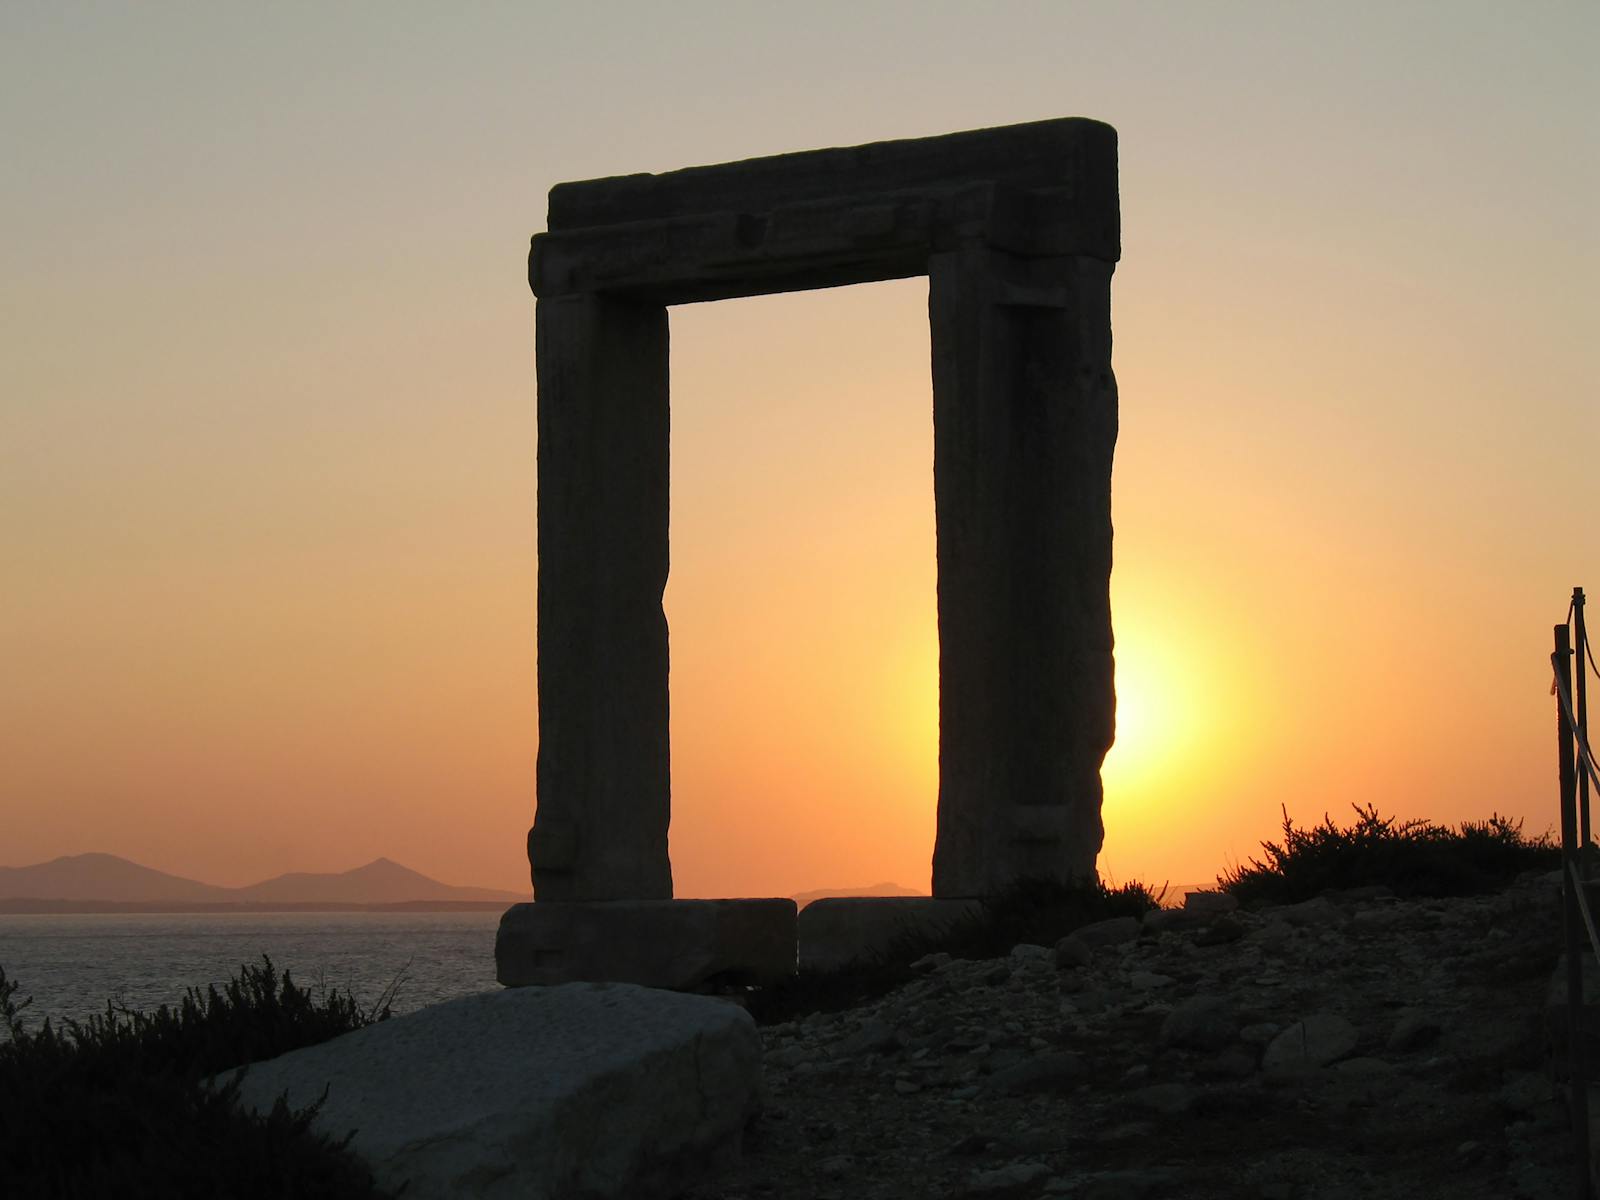 Temple of Apollo during Sunset, Naxos